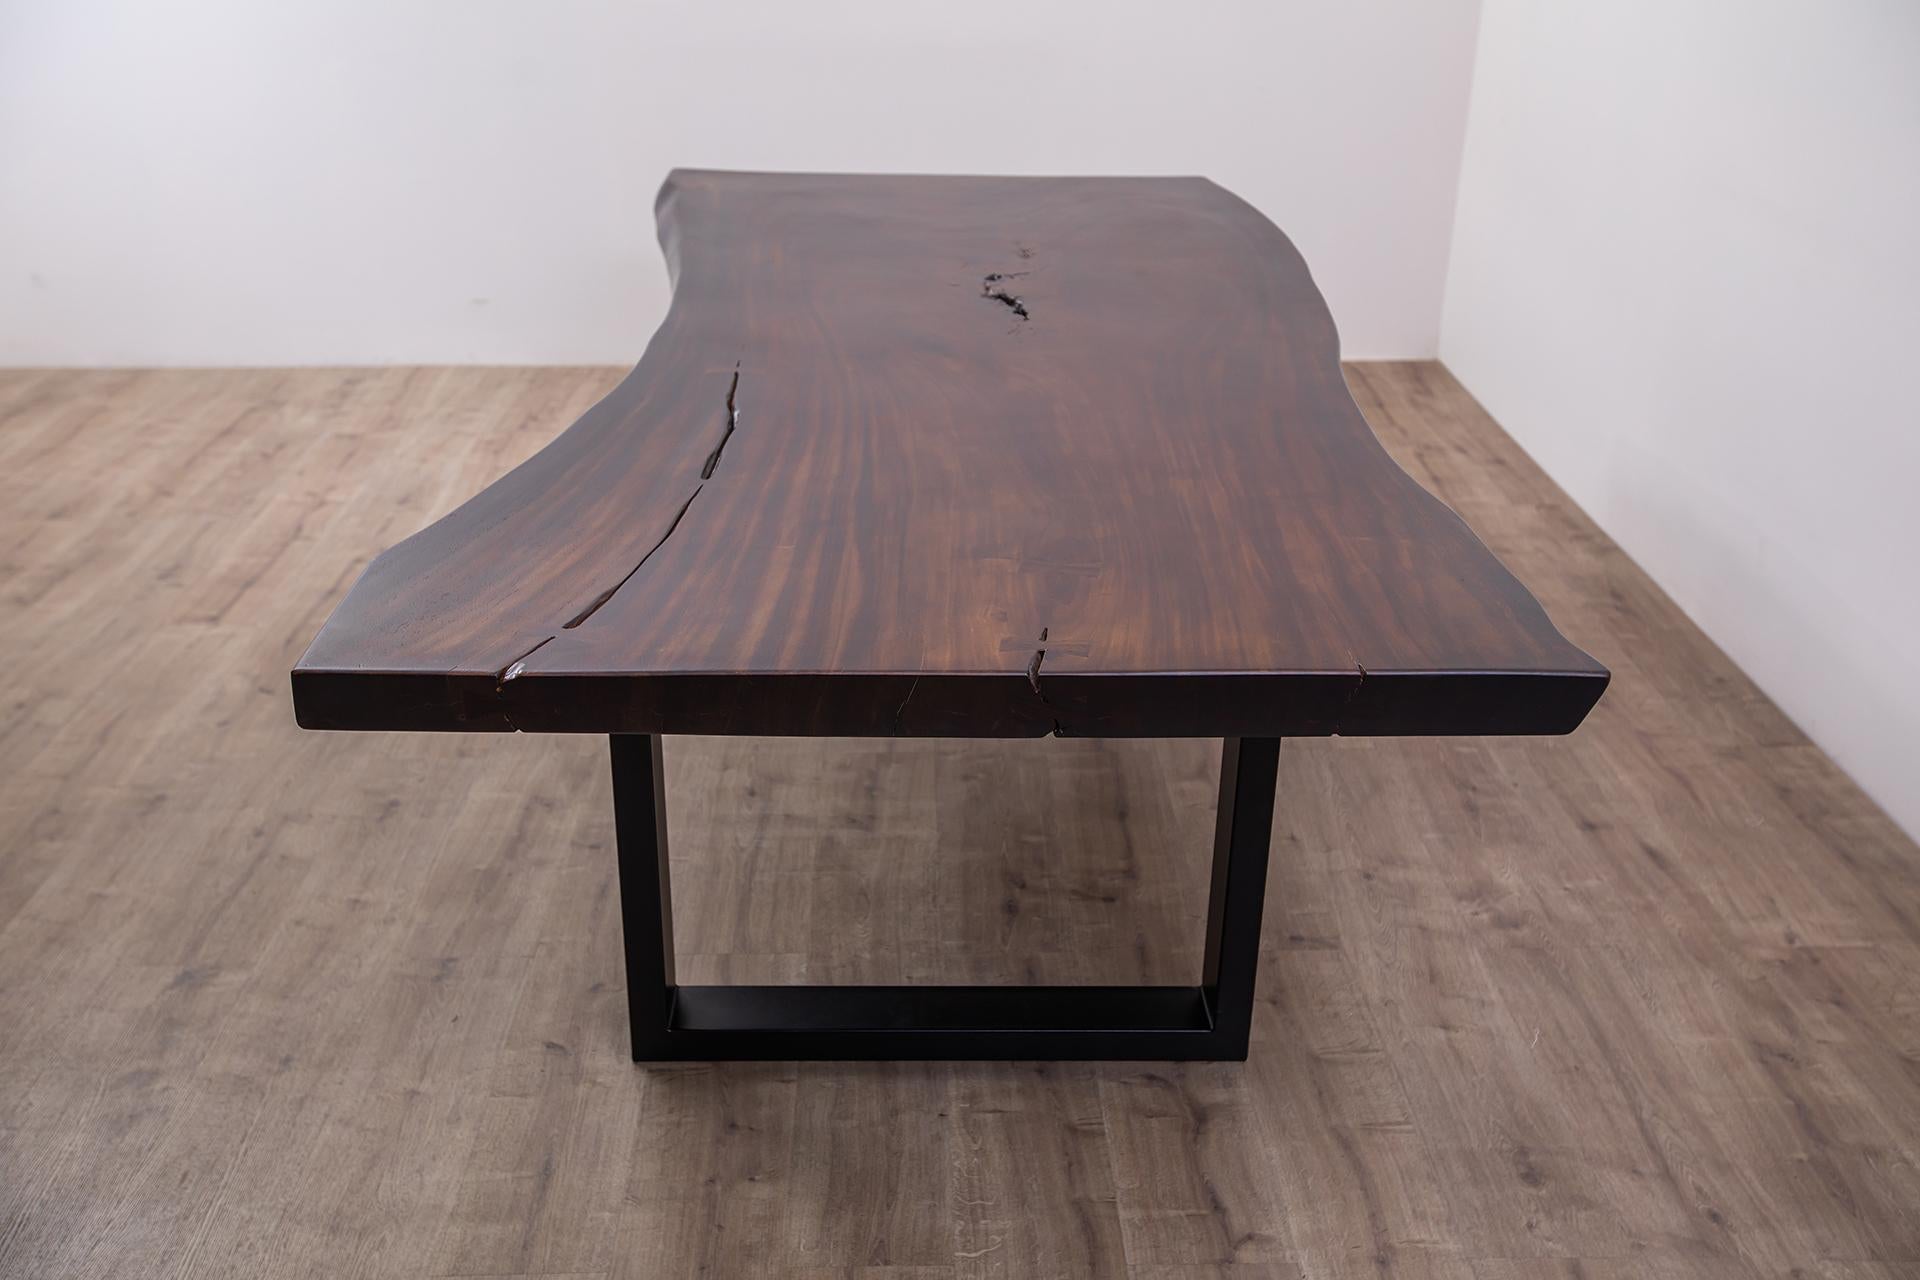 Discover the allure of our one-of-a-kind solid acacia dining/conference table, a true statement piece for your dining area. Handcrafted with care and attention to detail, this table showcases the natural beauty and uniqueness of solid acacia